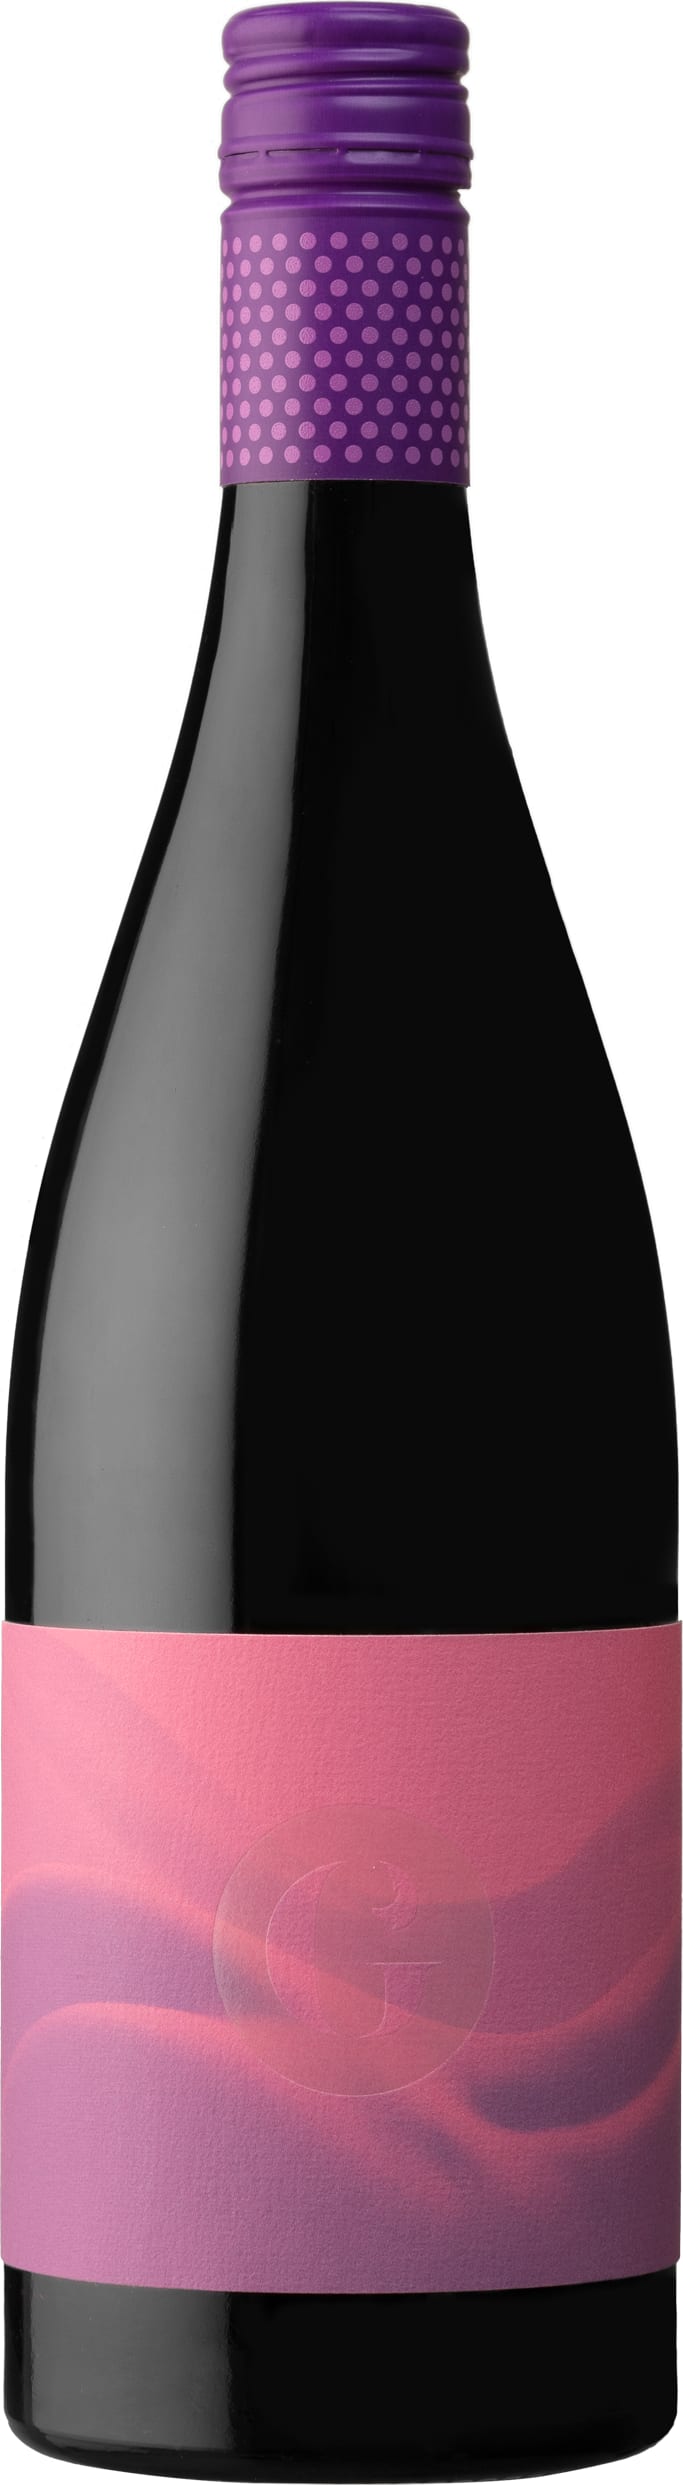 Teusner Wines The G Grenache 2021 75cl - Buy Teusner Wines Wines from GREAT WINES DIRECT wine shop